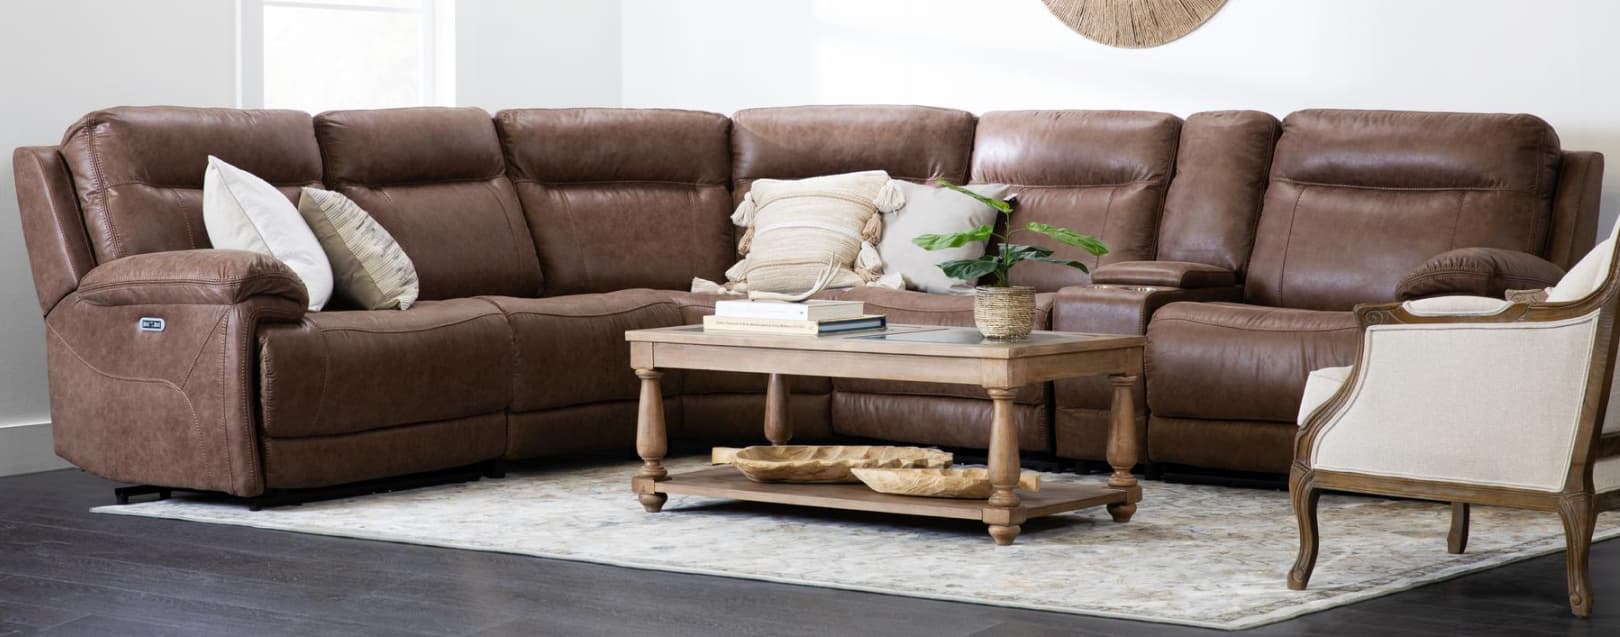 Brown Couch Living Room Ideas